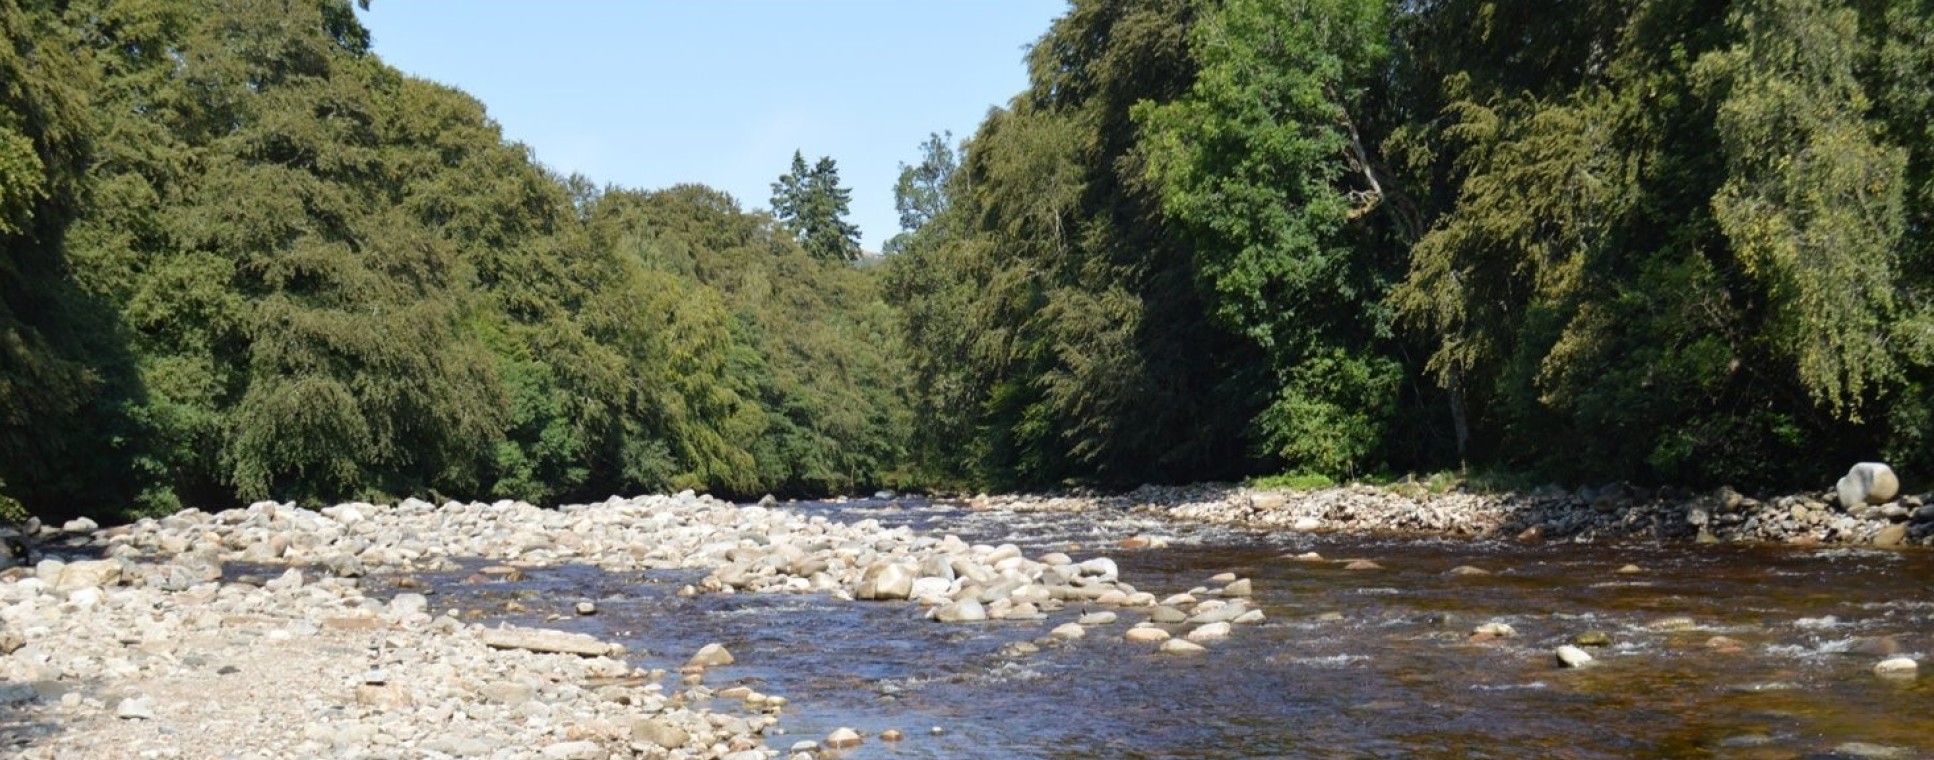 A river with stony edges is surround by trees on a sunny day with blue sky